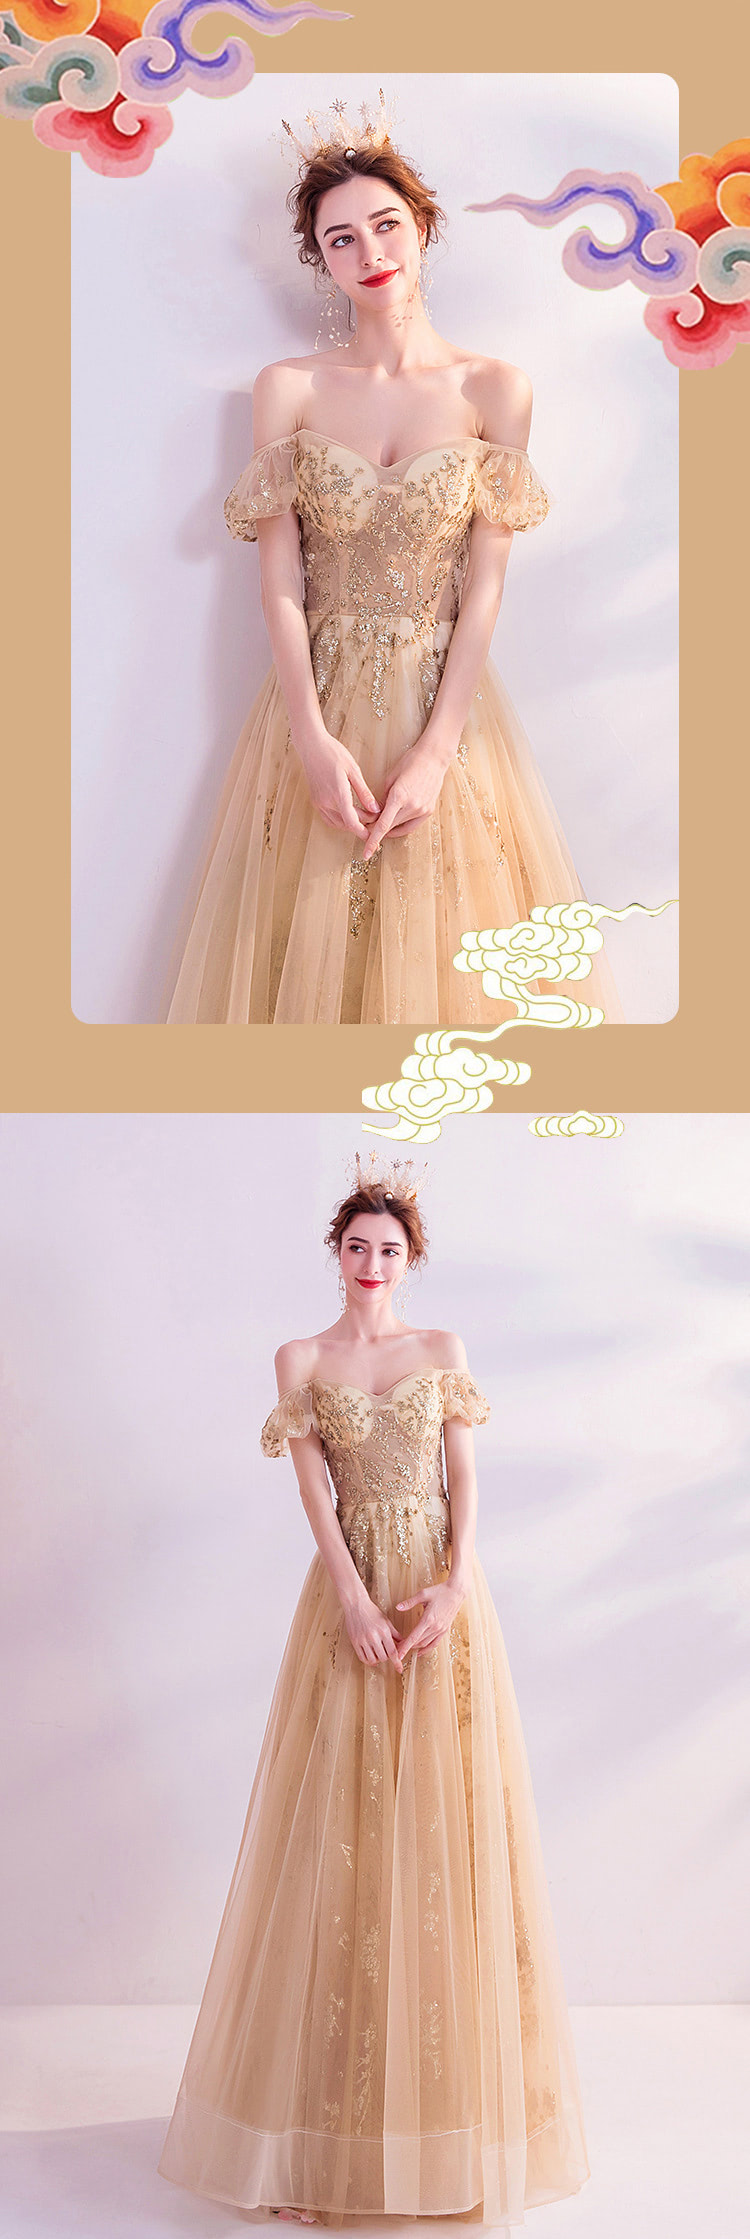 Off-Shoulder-Golden-Evening-Gown-Prom-Dress-for-Toast-Banquet-Party13